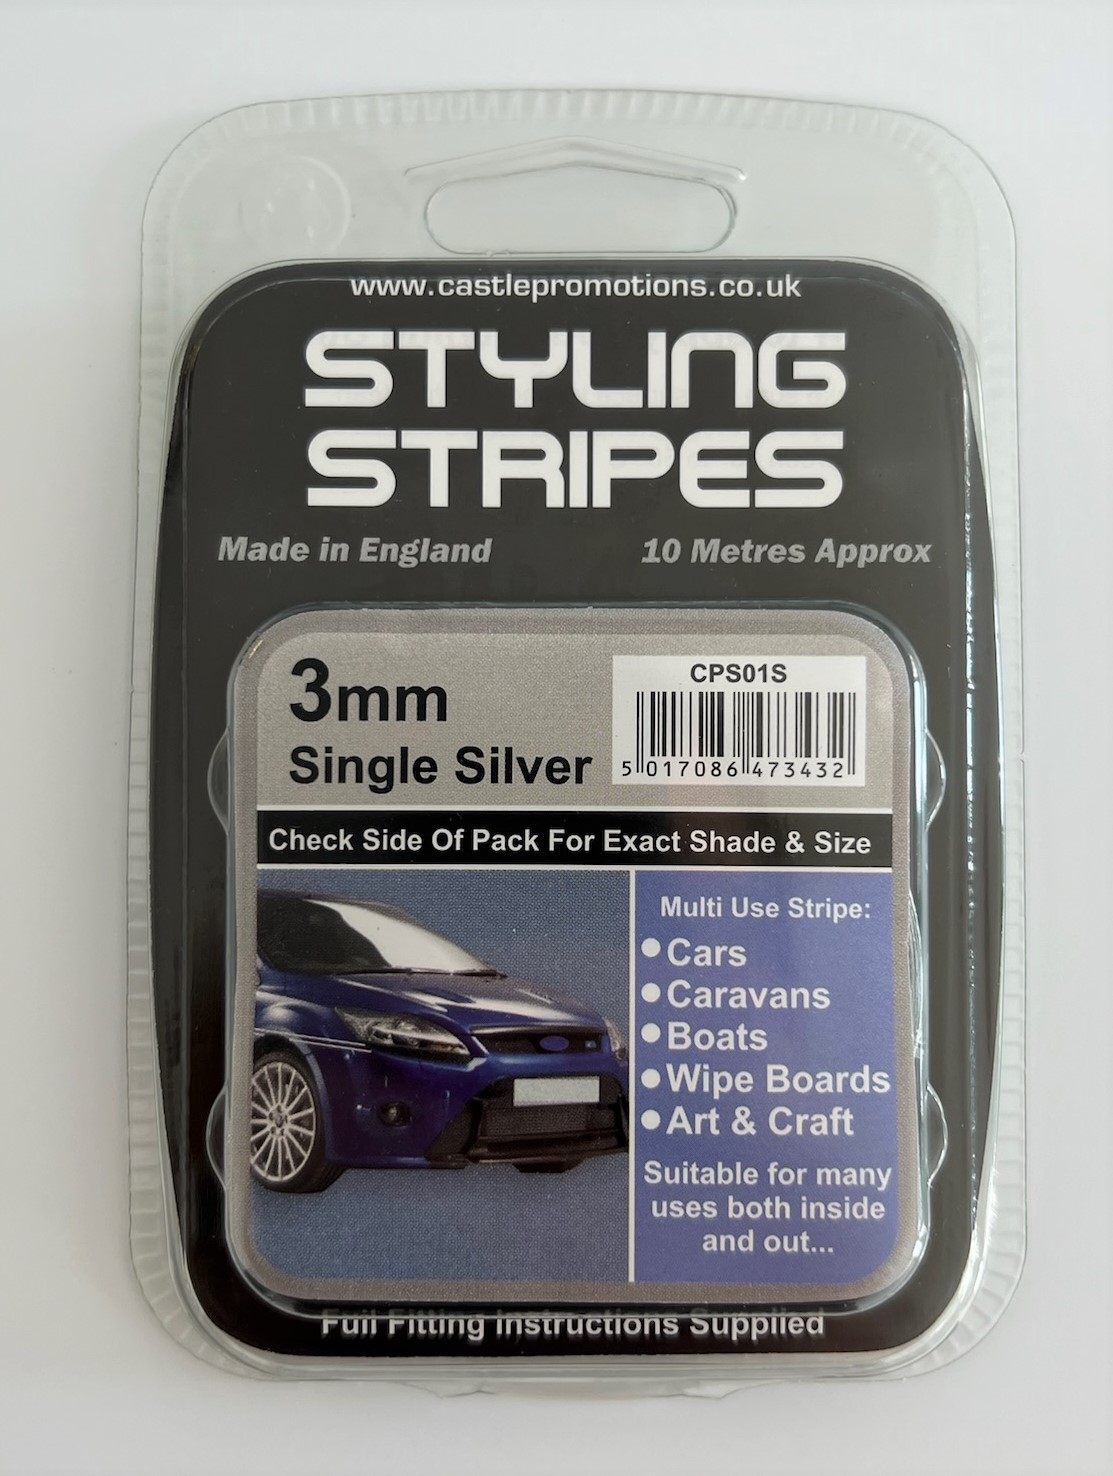 CPS01 Silver 3mm Styling Stripe